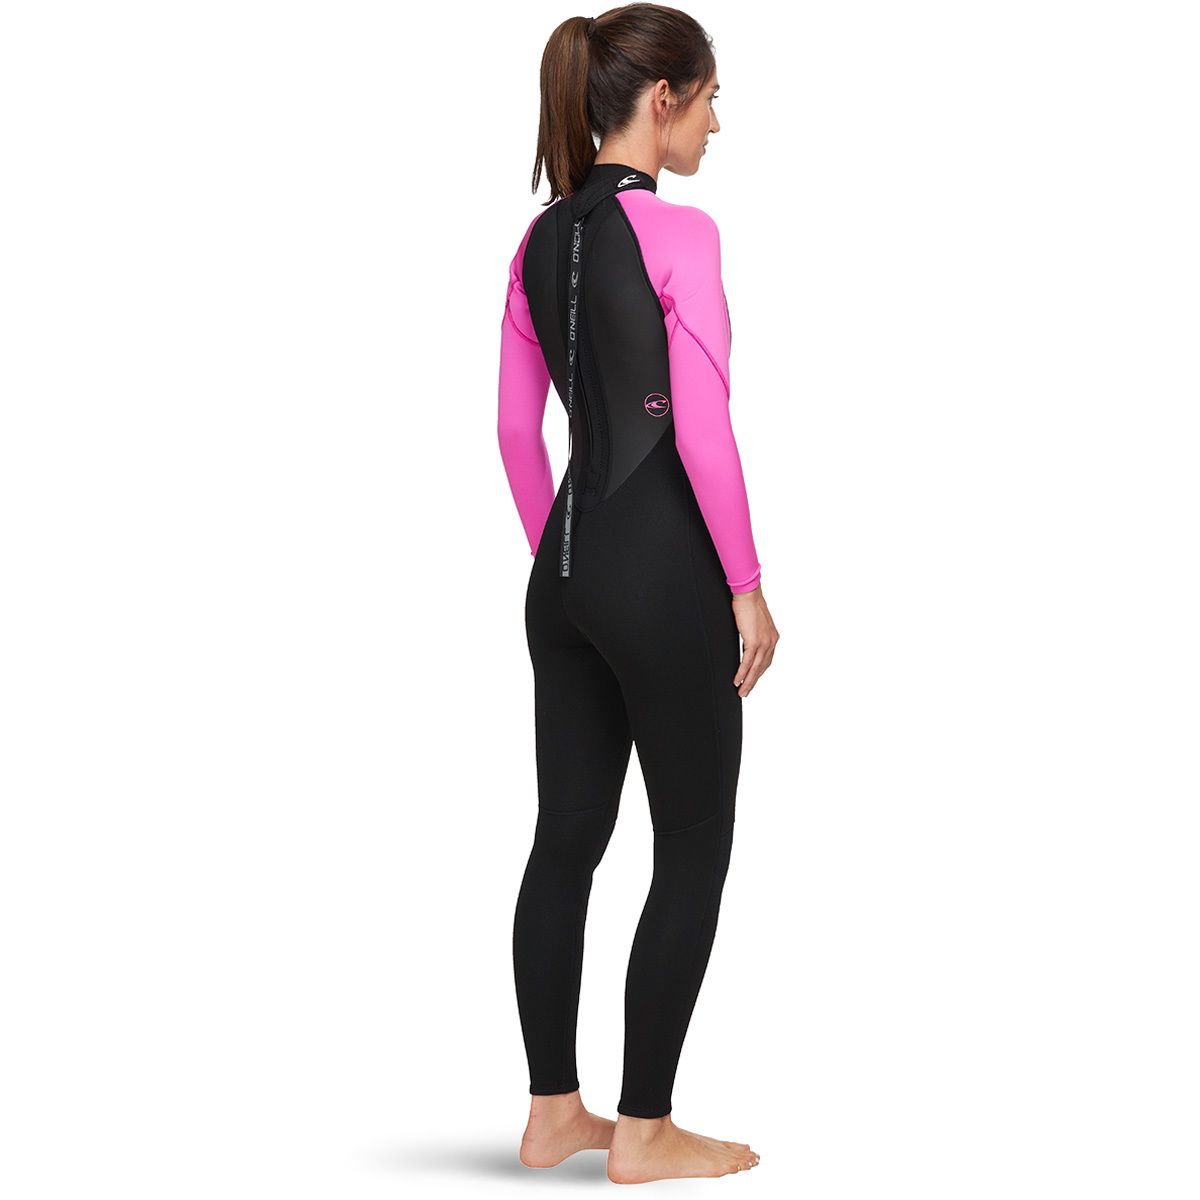 O'neill Ladies O'neill Wetsuit Reactor 3/2 Summer Full Wetsuit Blk/Berry 2019/20 